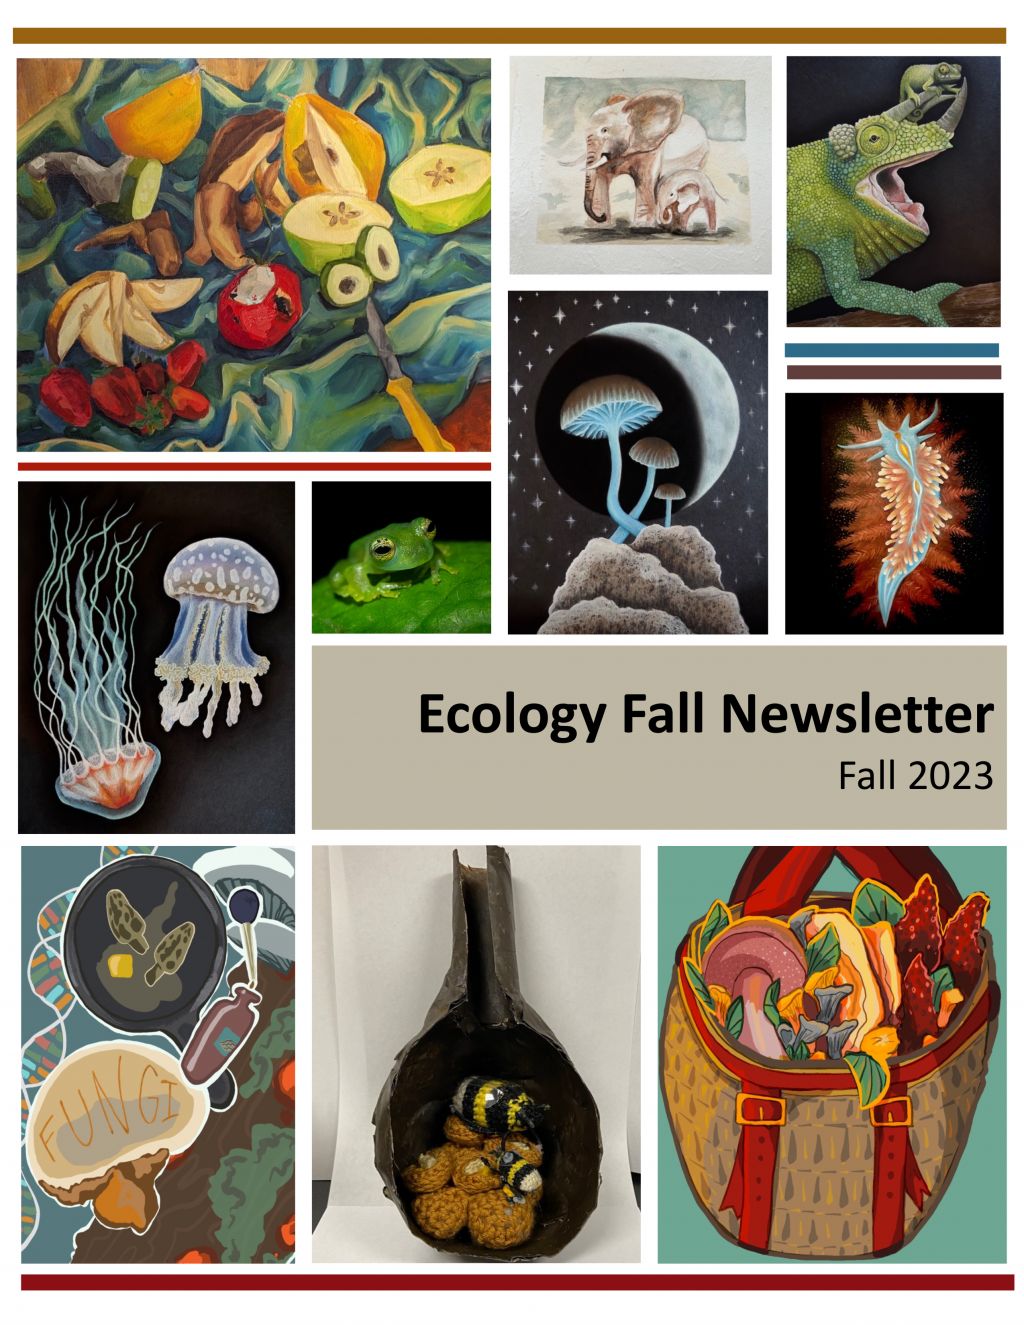 Ecology newsletter front page